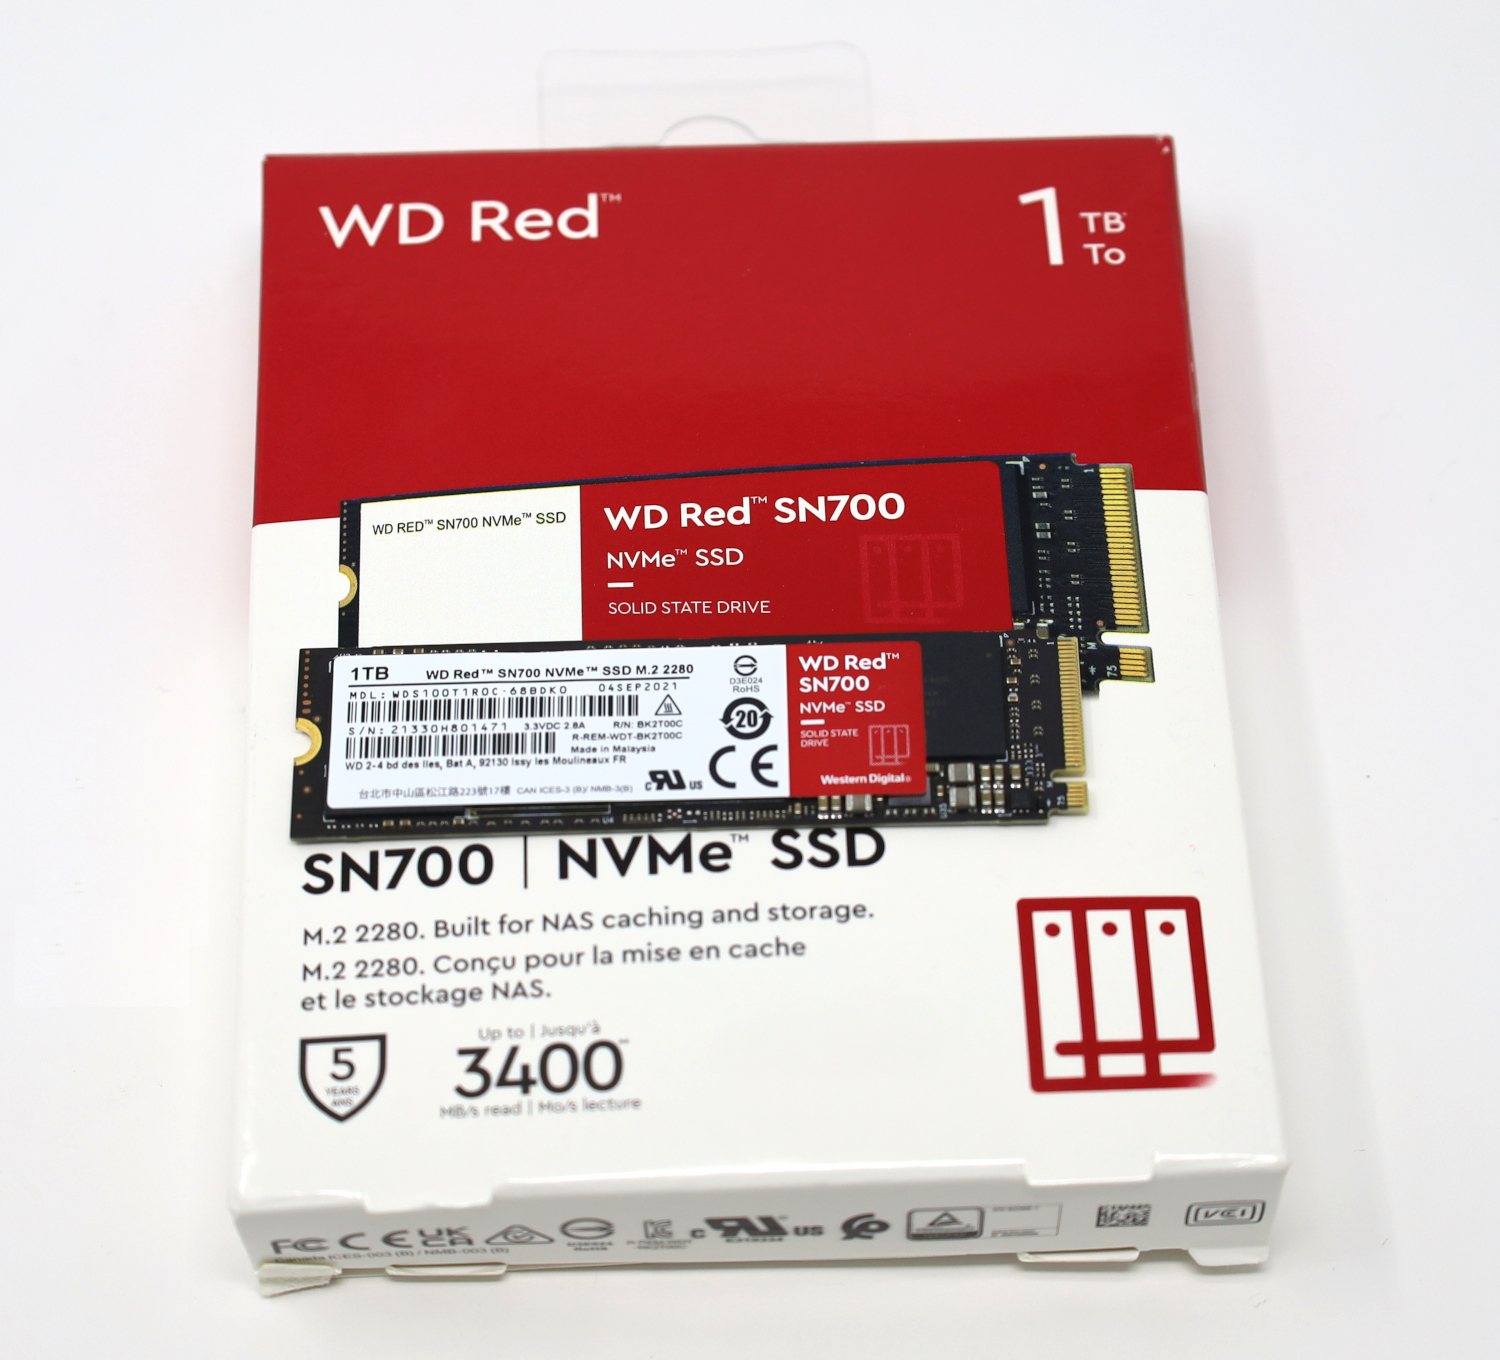 WD Red SN700 1TB NVMe SSD Review Vastly Improved - Page 3 of 3